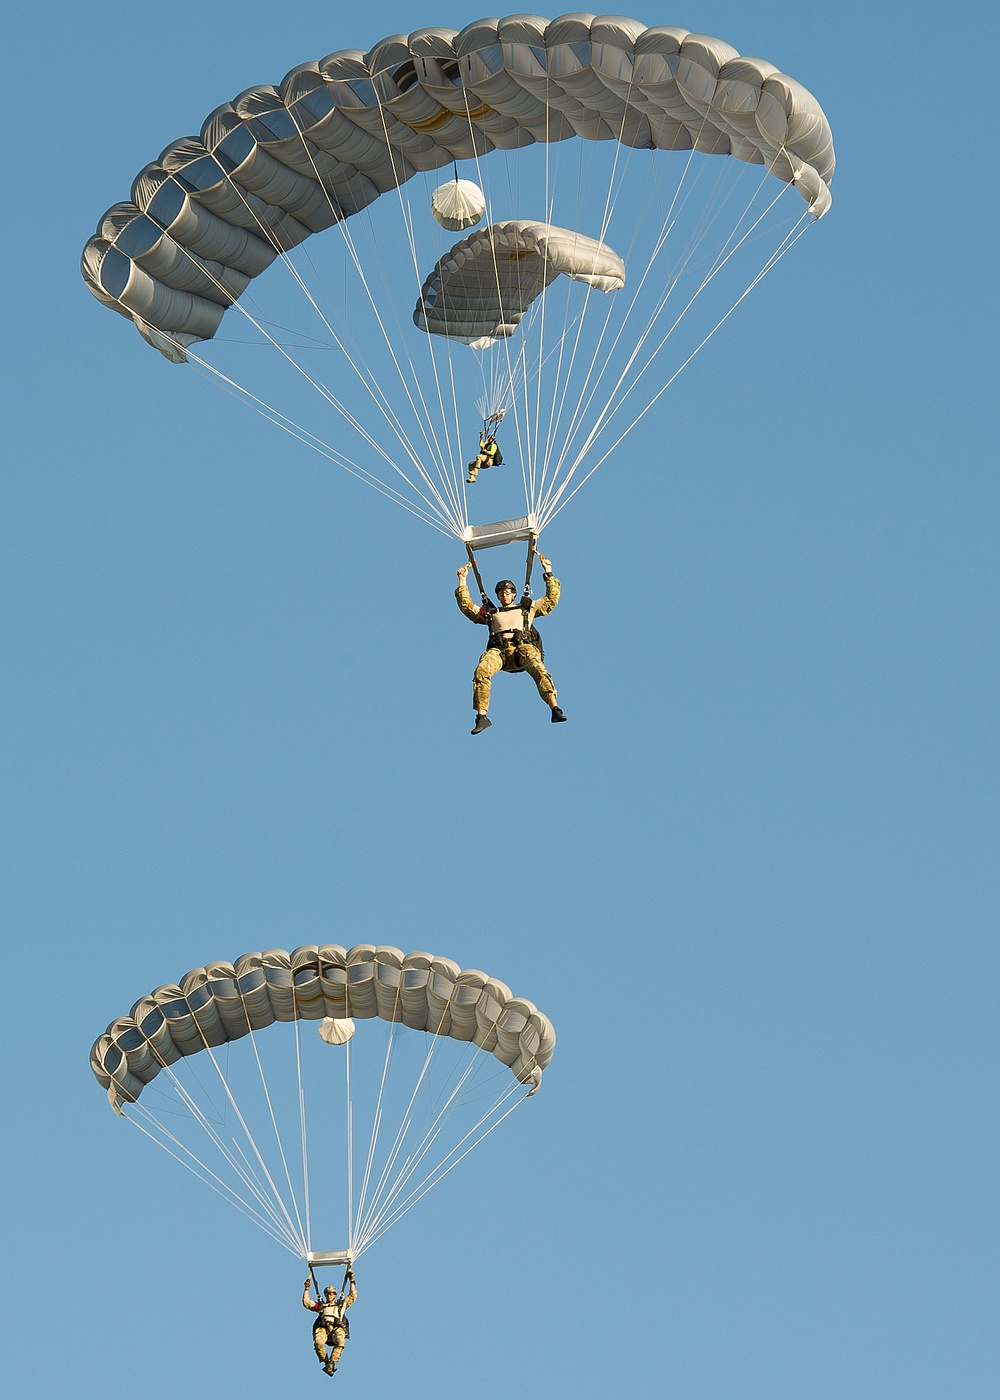 U.S. Air Force and Army Special Forces train in middle Georgia.